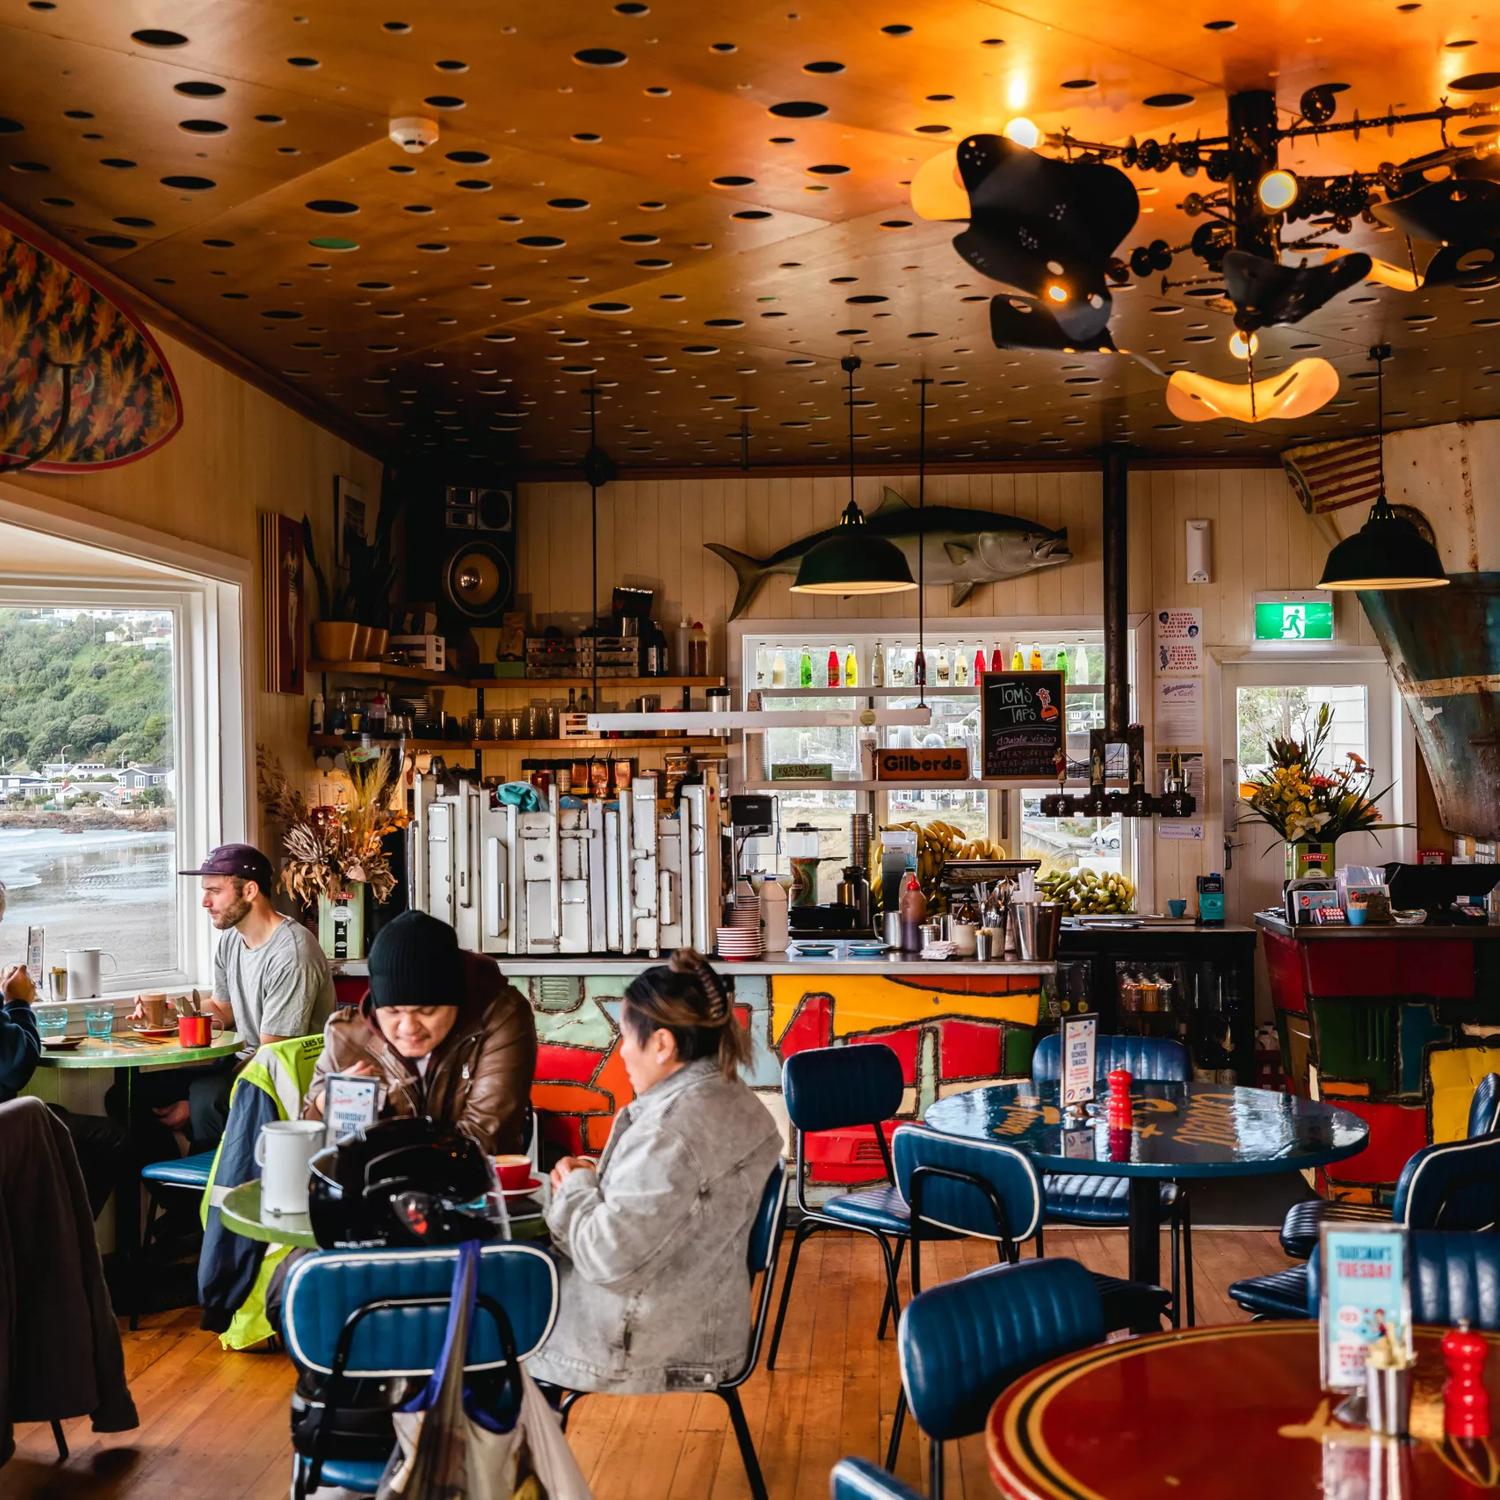 Customers sitting inside Maranui Cafe enjoying the lookout over Lyall Bay and their meals. Fish and surf decor surround the room.